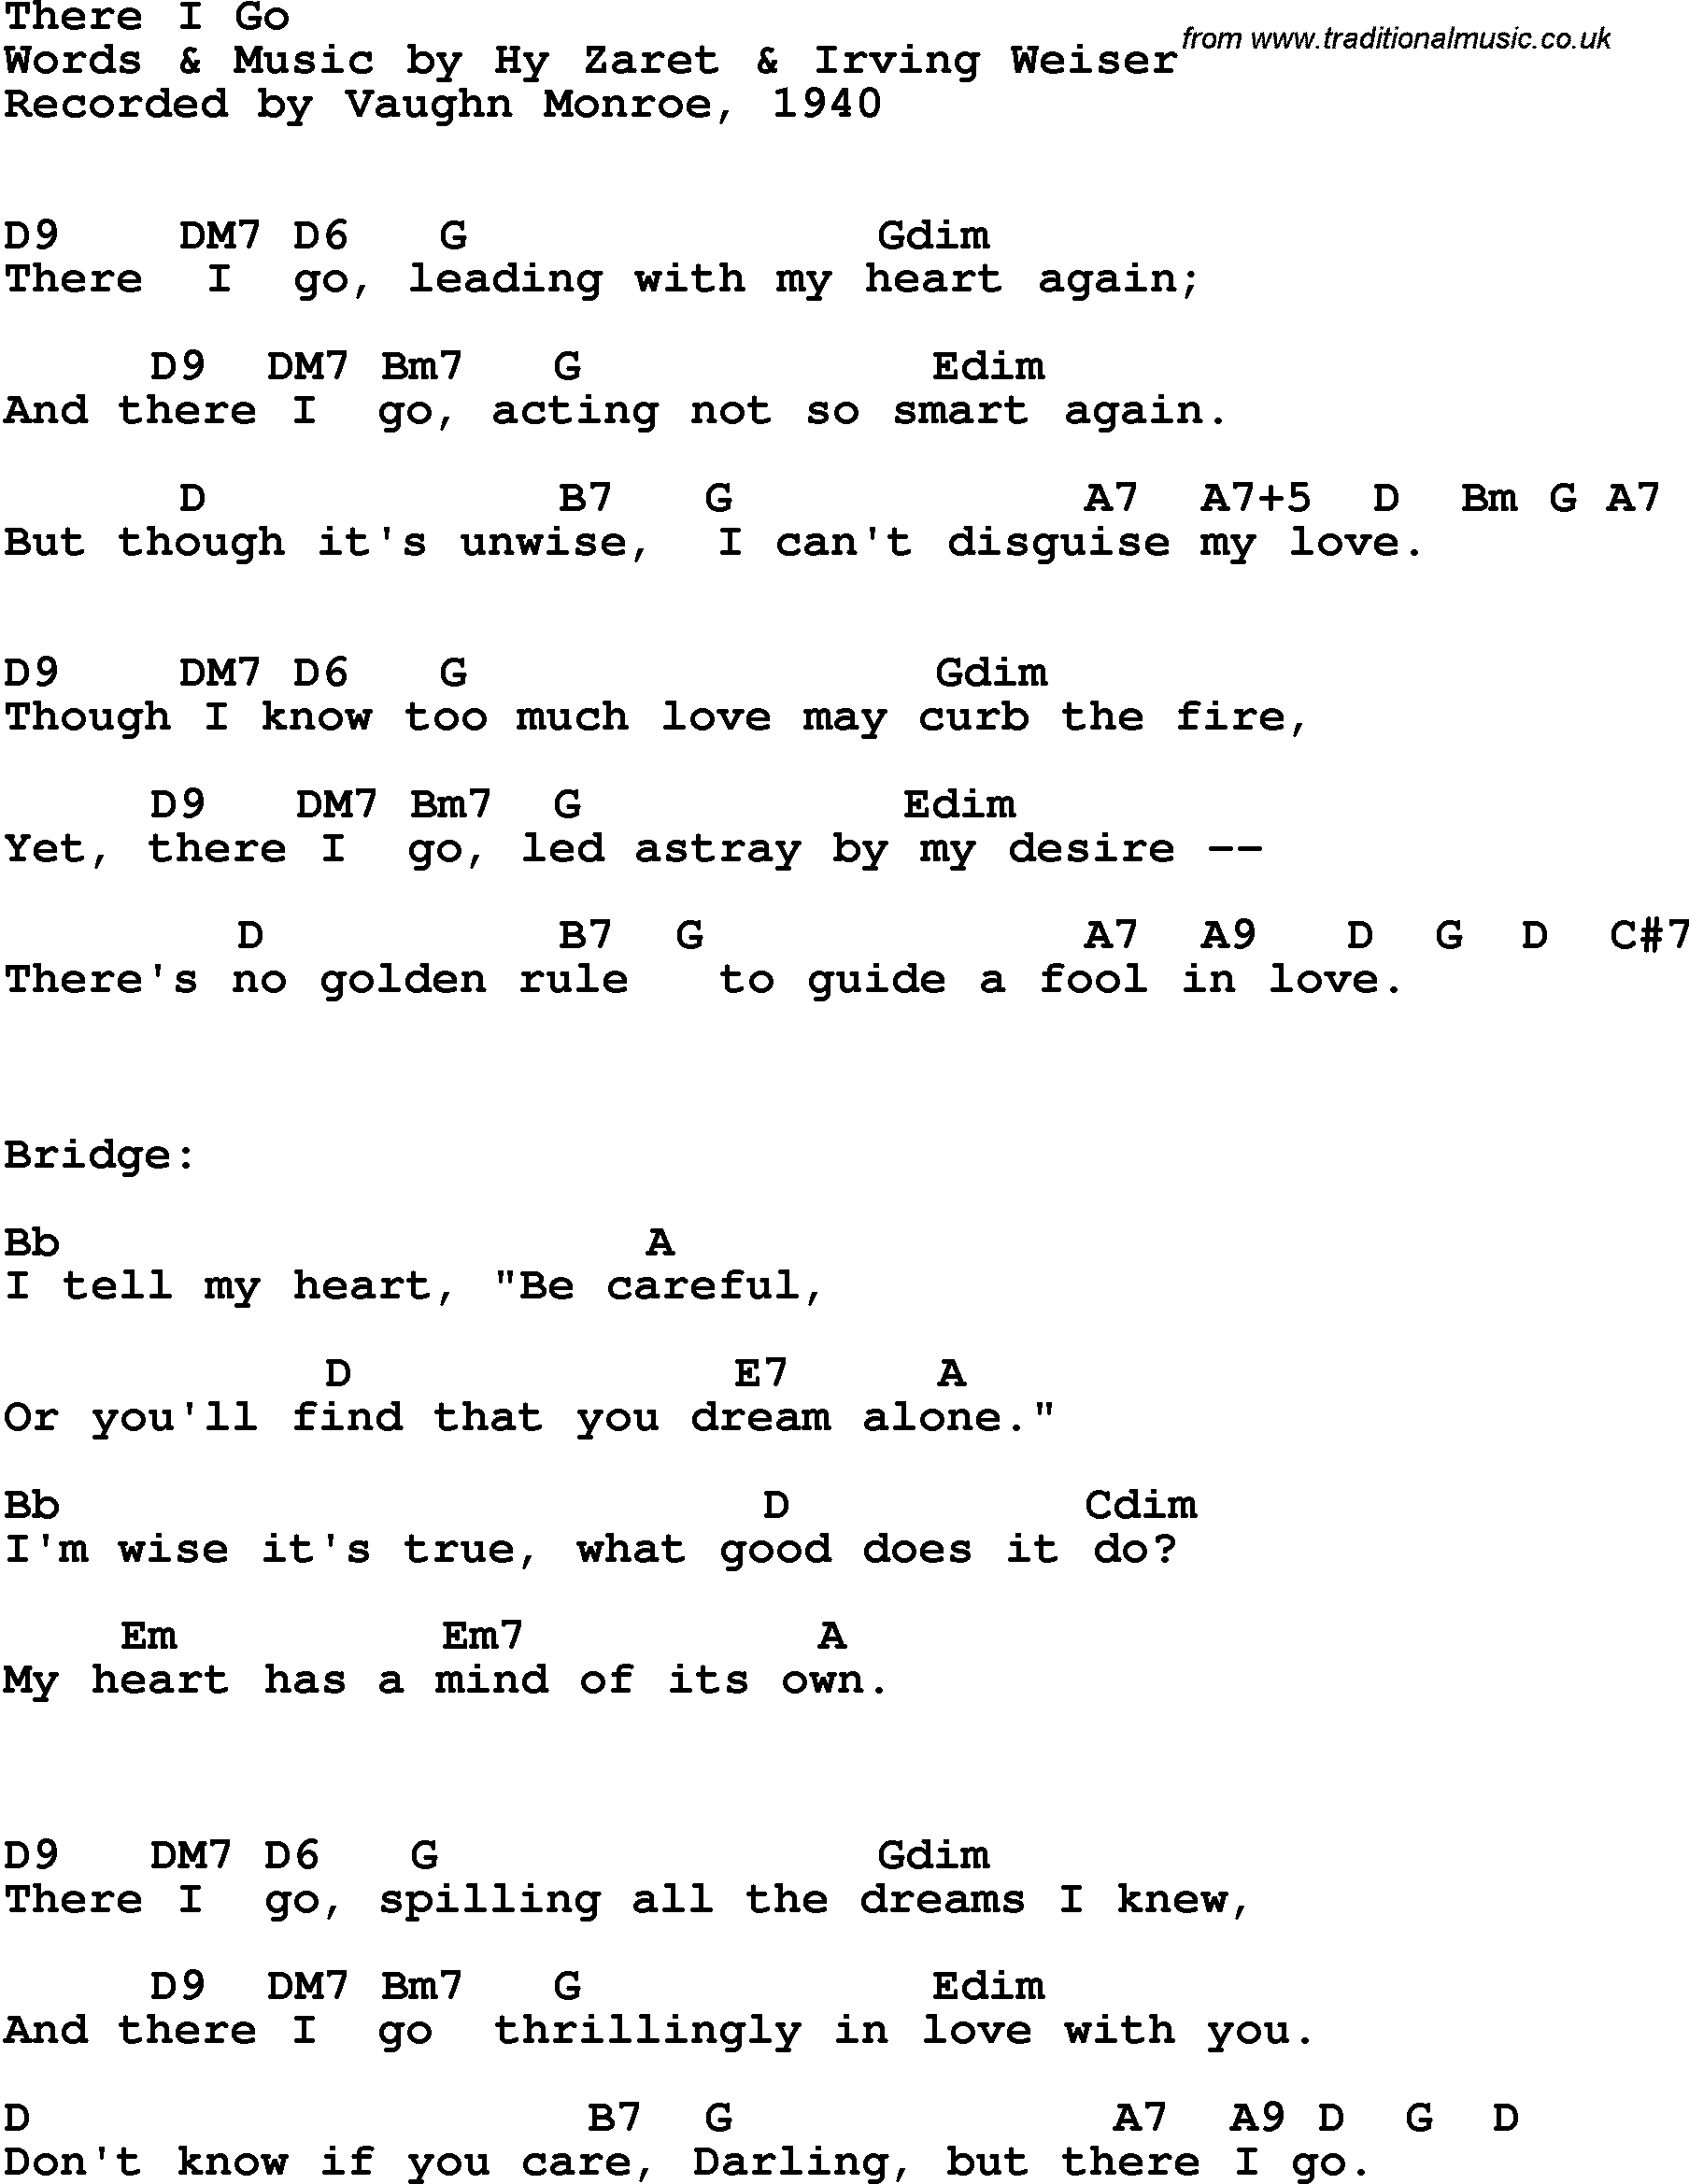 Song Lyrics with guitar chords for There I Go - Vaughn Monroe, 1940